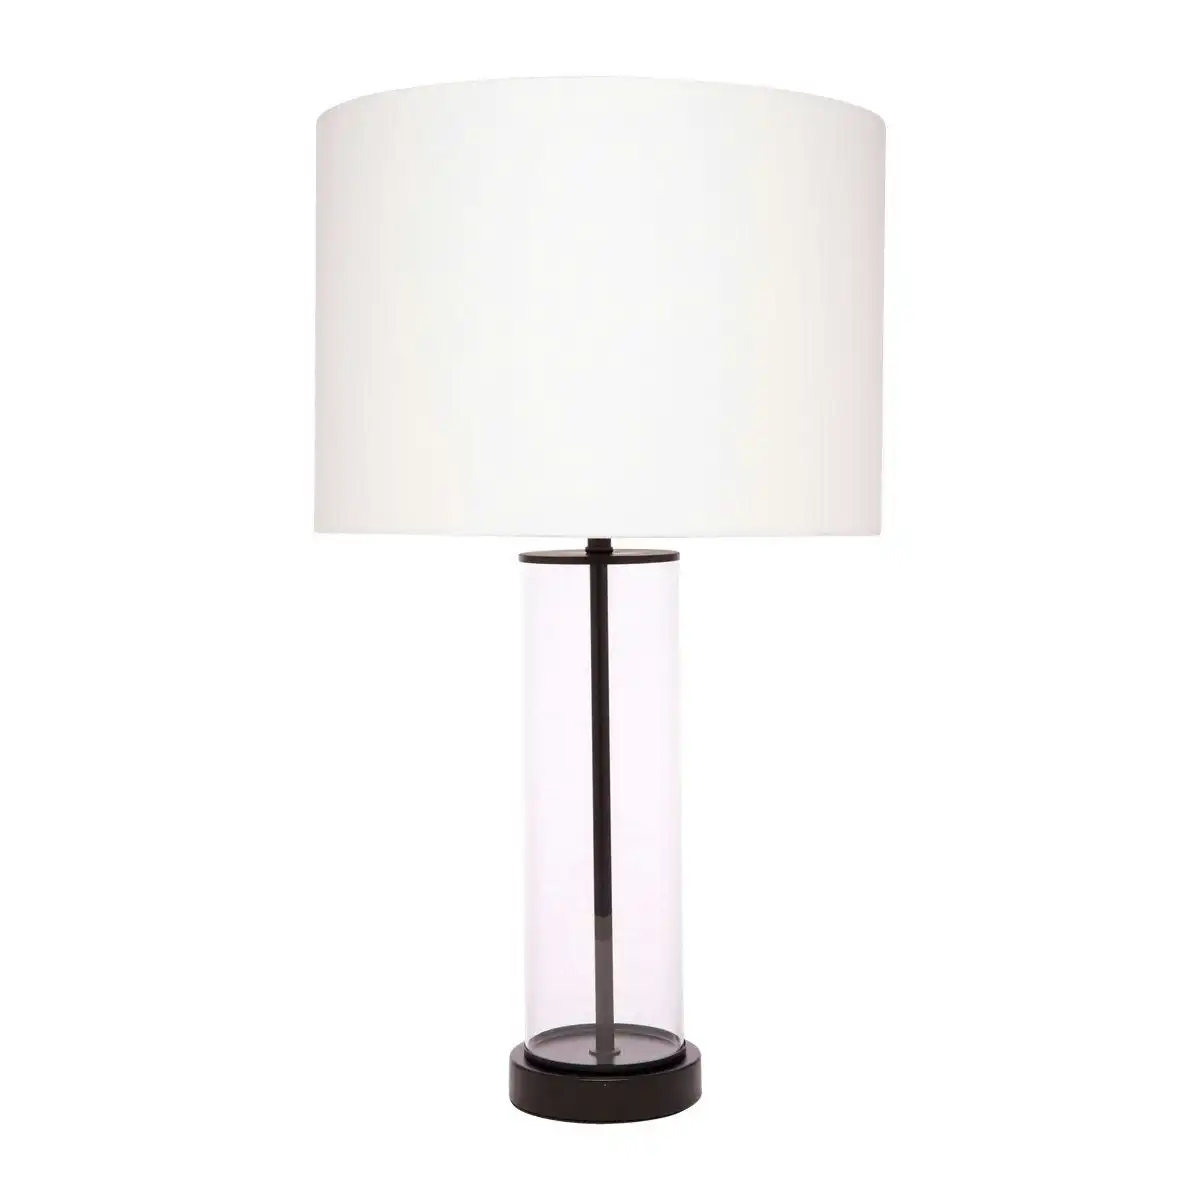 East Side Table Lamp - Black with White Shade